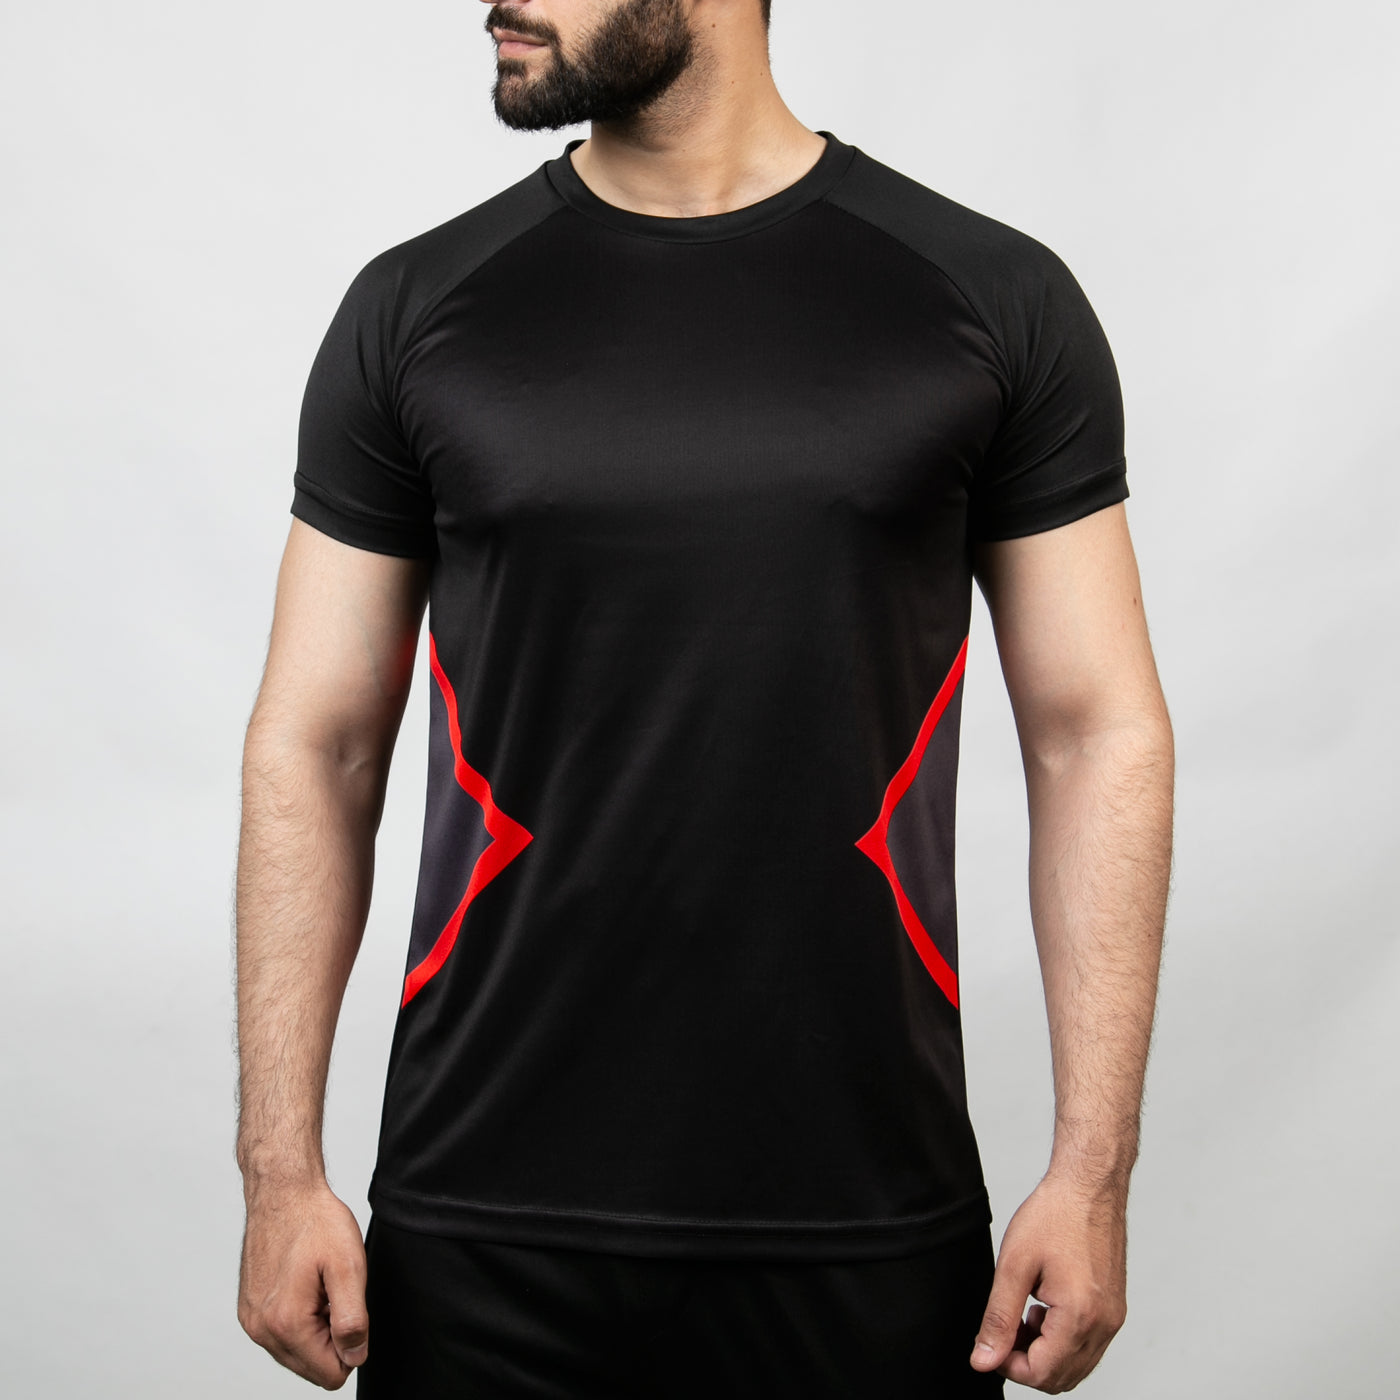 Black Tron Series Quick Dry T-Shirt with Red Details